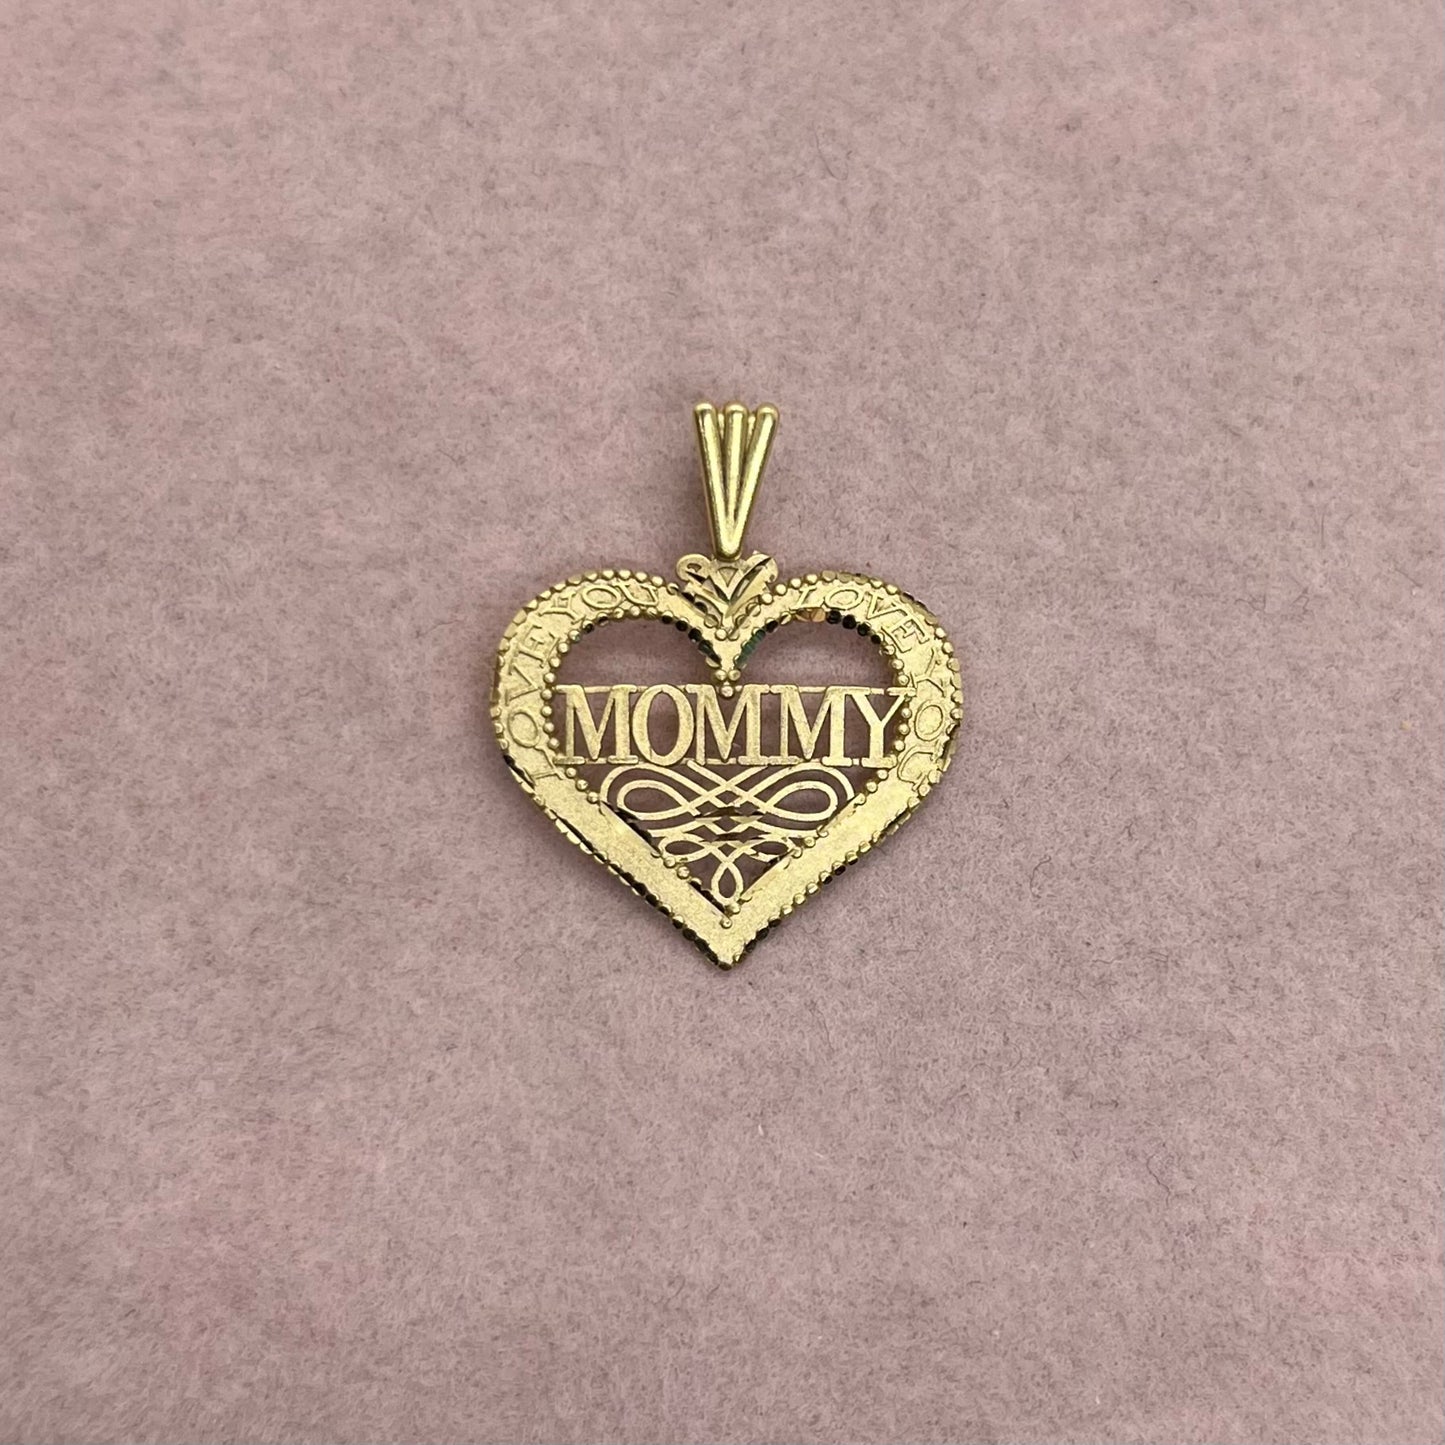 Mommy Heart Charm by Michael Anthony